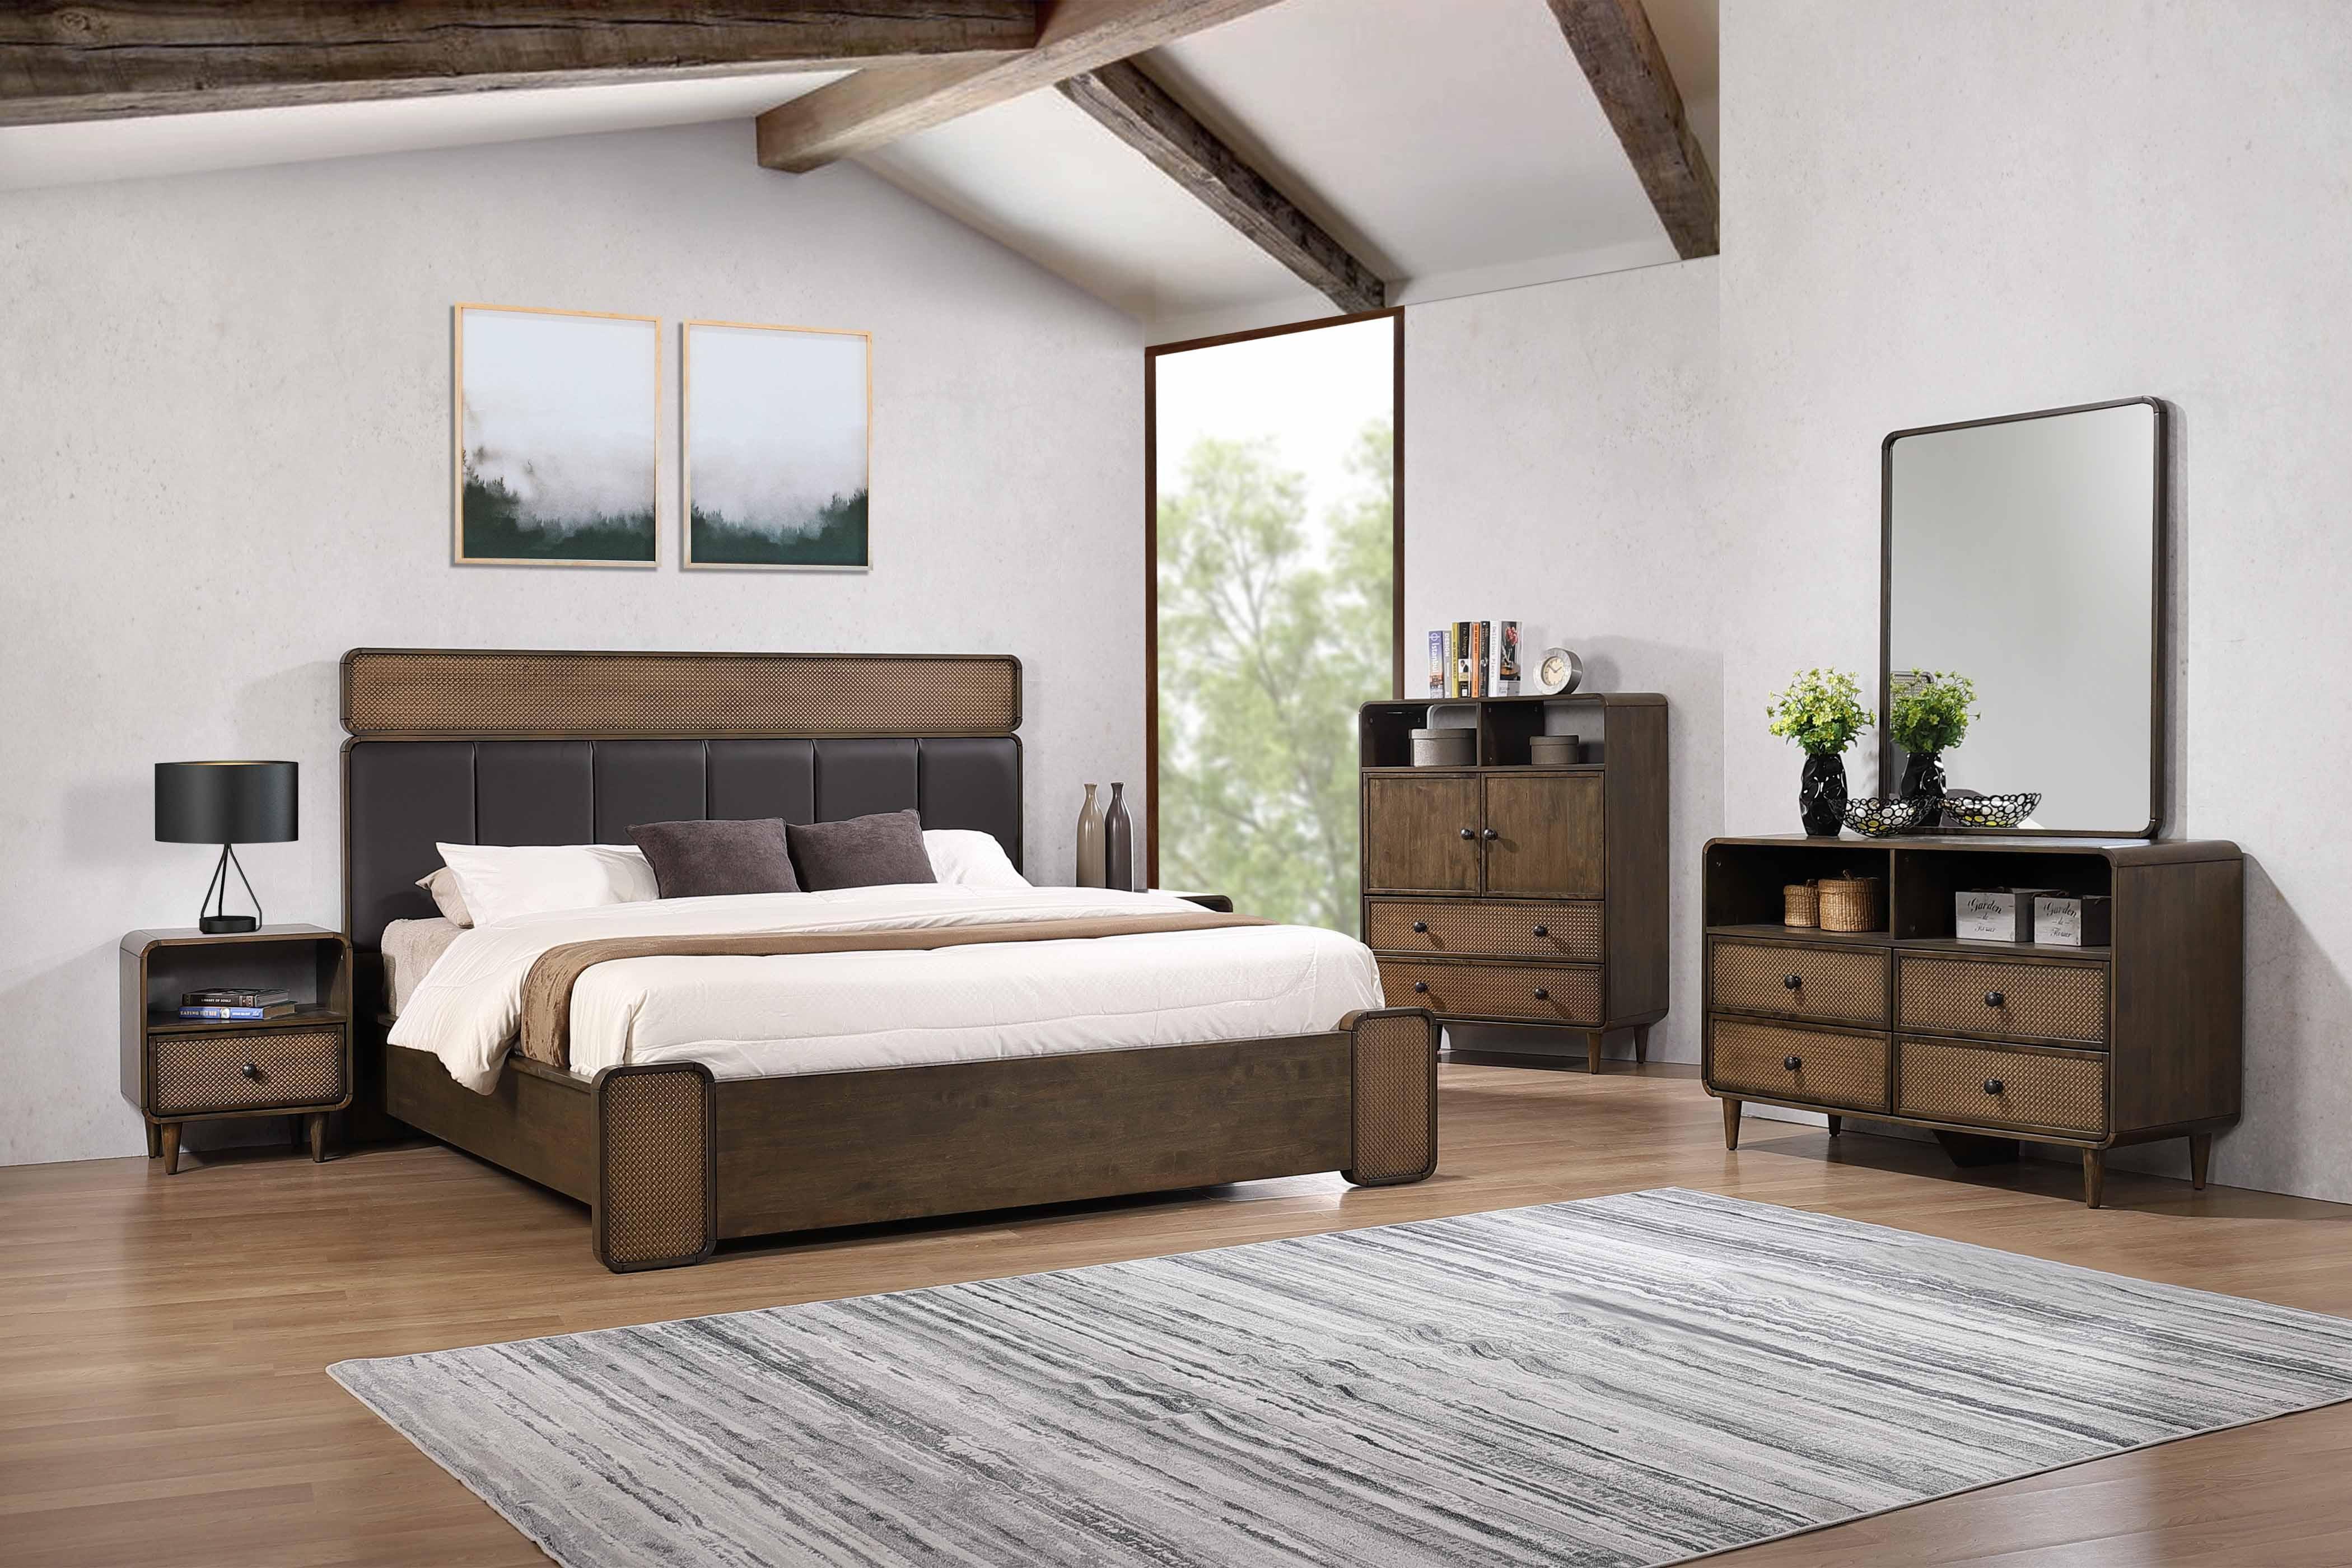 Liverpool Modern Rattan Bedroom Suite. Queen size bed frame with modern rattan design. Matching dresser with mirror, nightstands & tallboy (not shown) available.